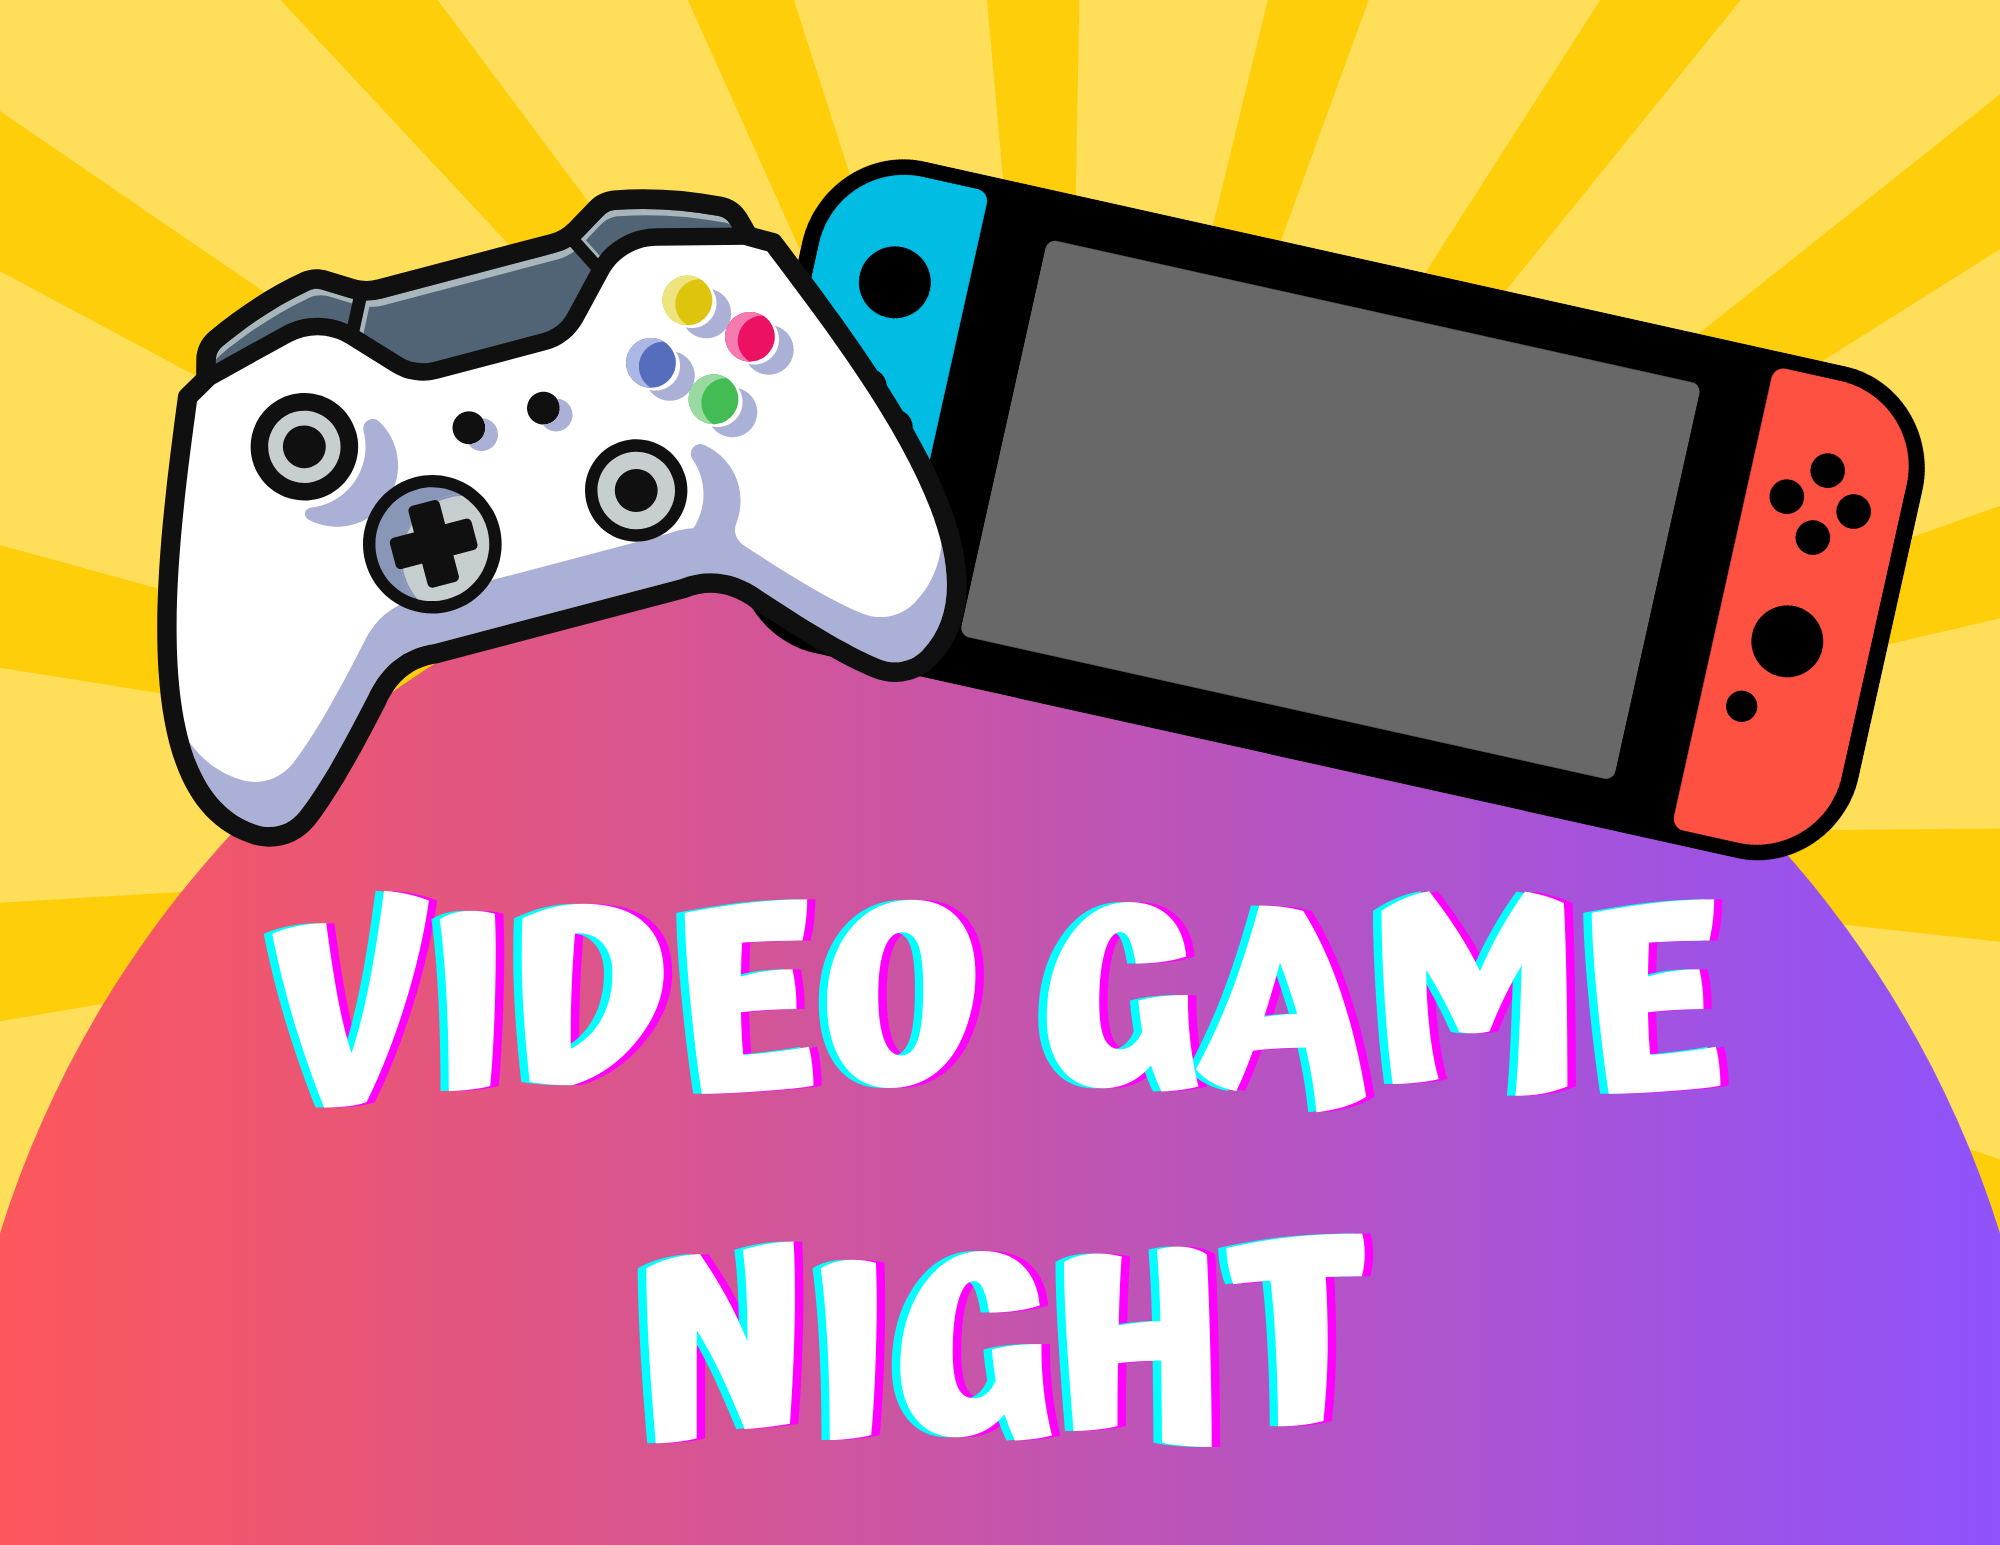 Cartoon graphic depicting an Xbox One controller and Switch with the text "Video Game Night" underneath